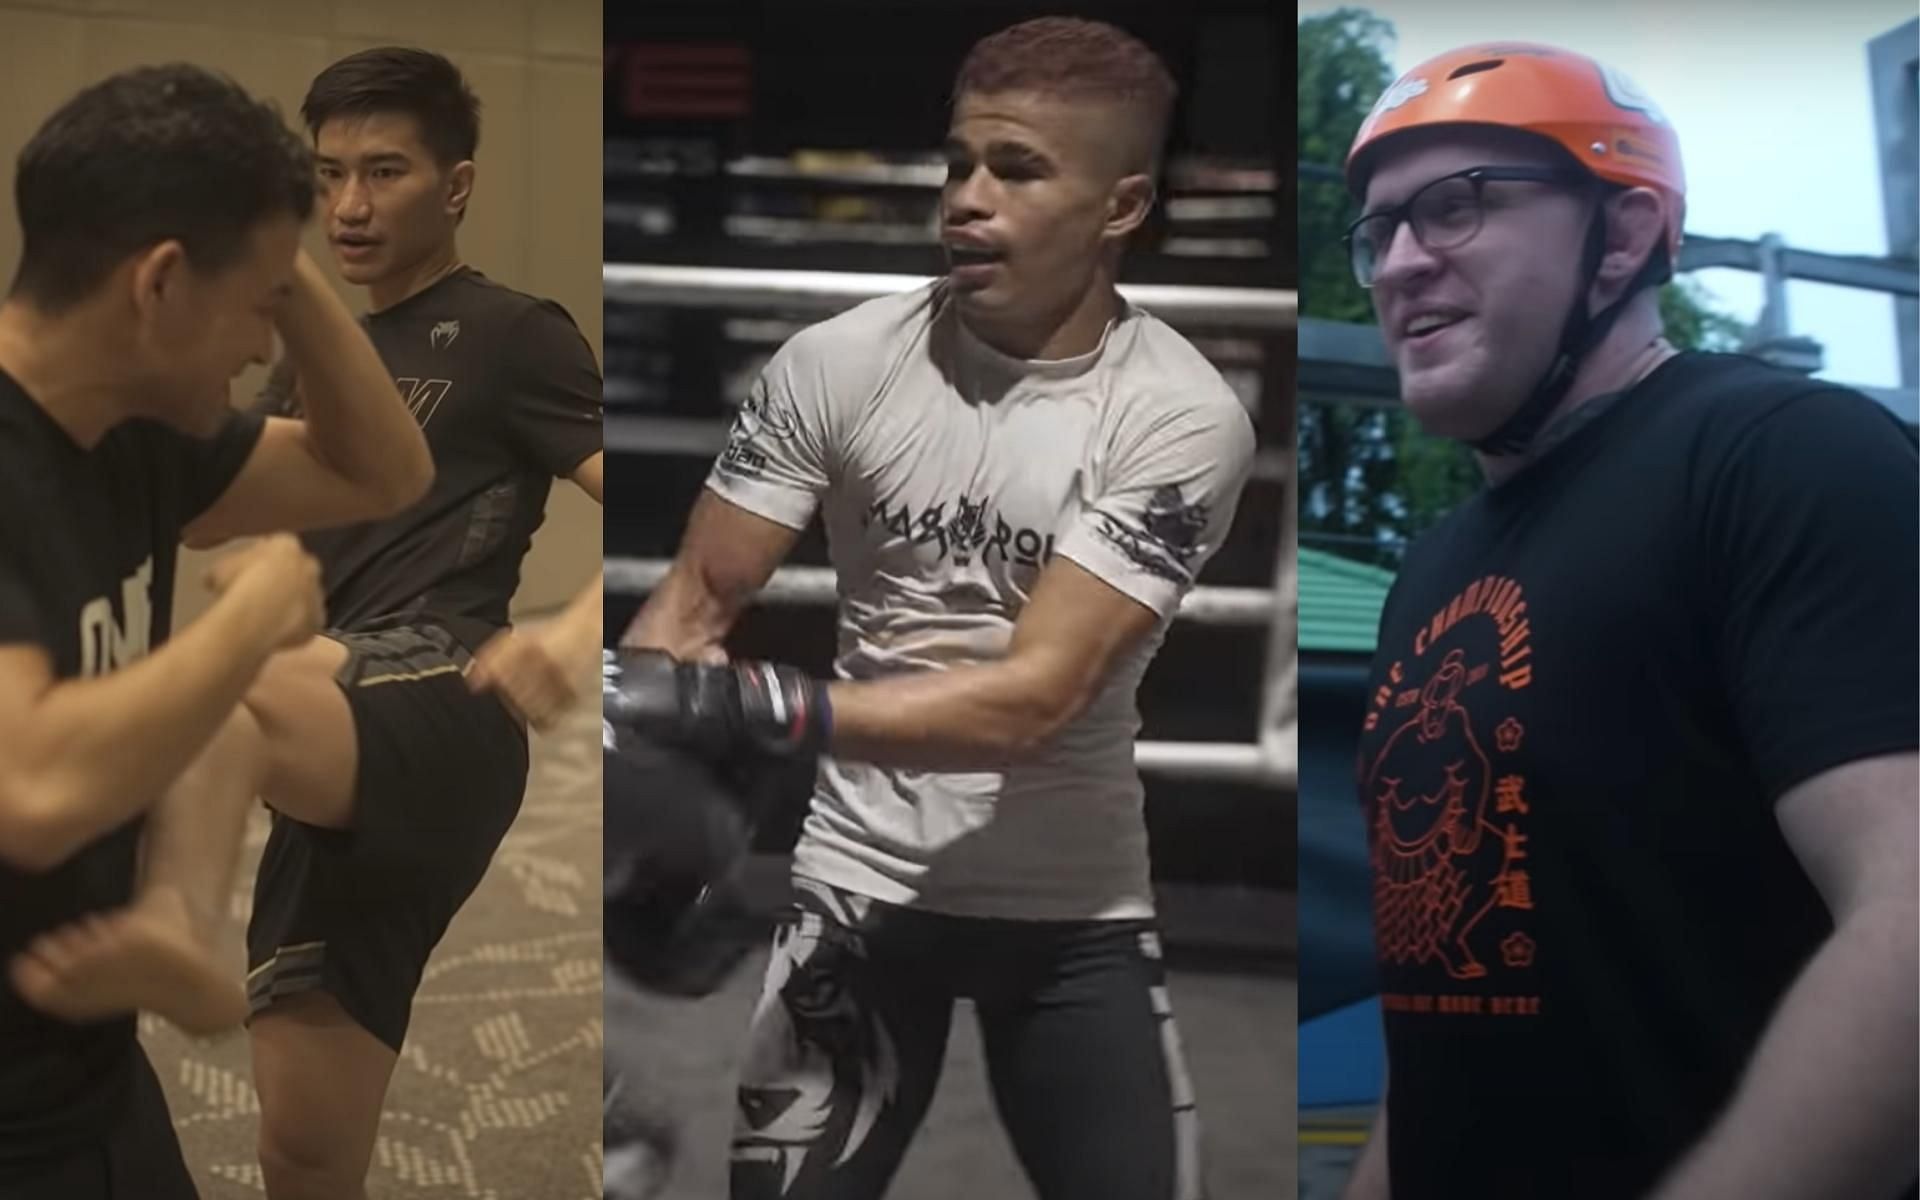 (From right to left) some of the stars of ONE 158 appearing in their latest vlog: Tawanchai PK.Saenchai, Fabricio Andrade and Odie Delaney. (Images courtesy of ONE Championship)